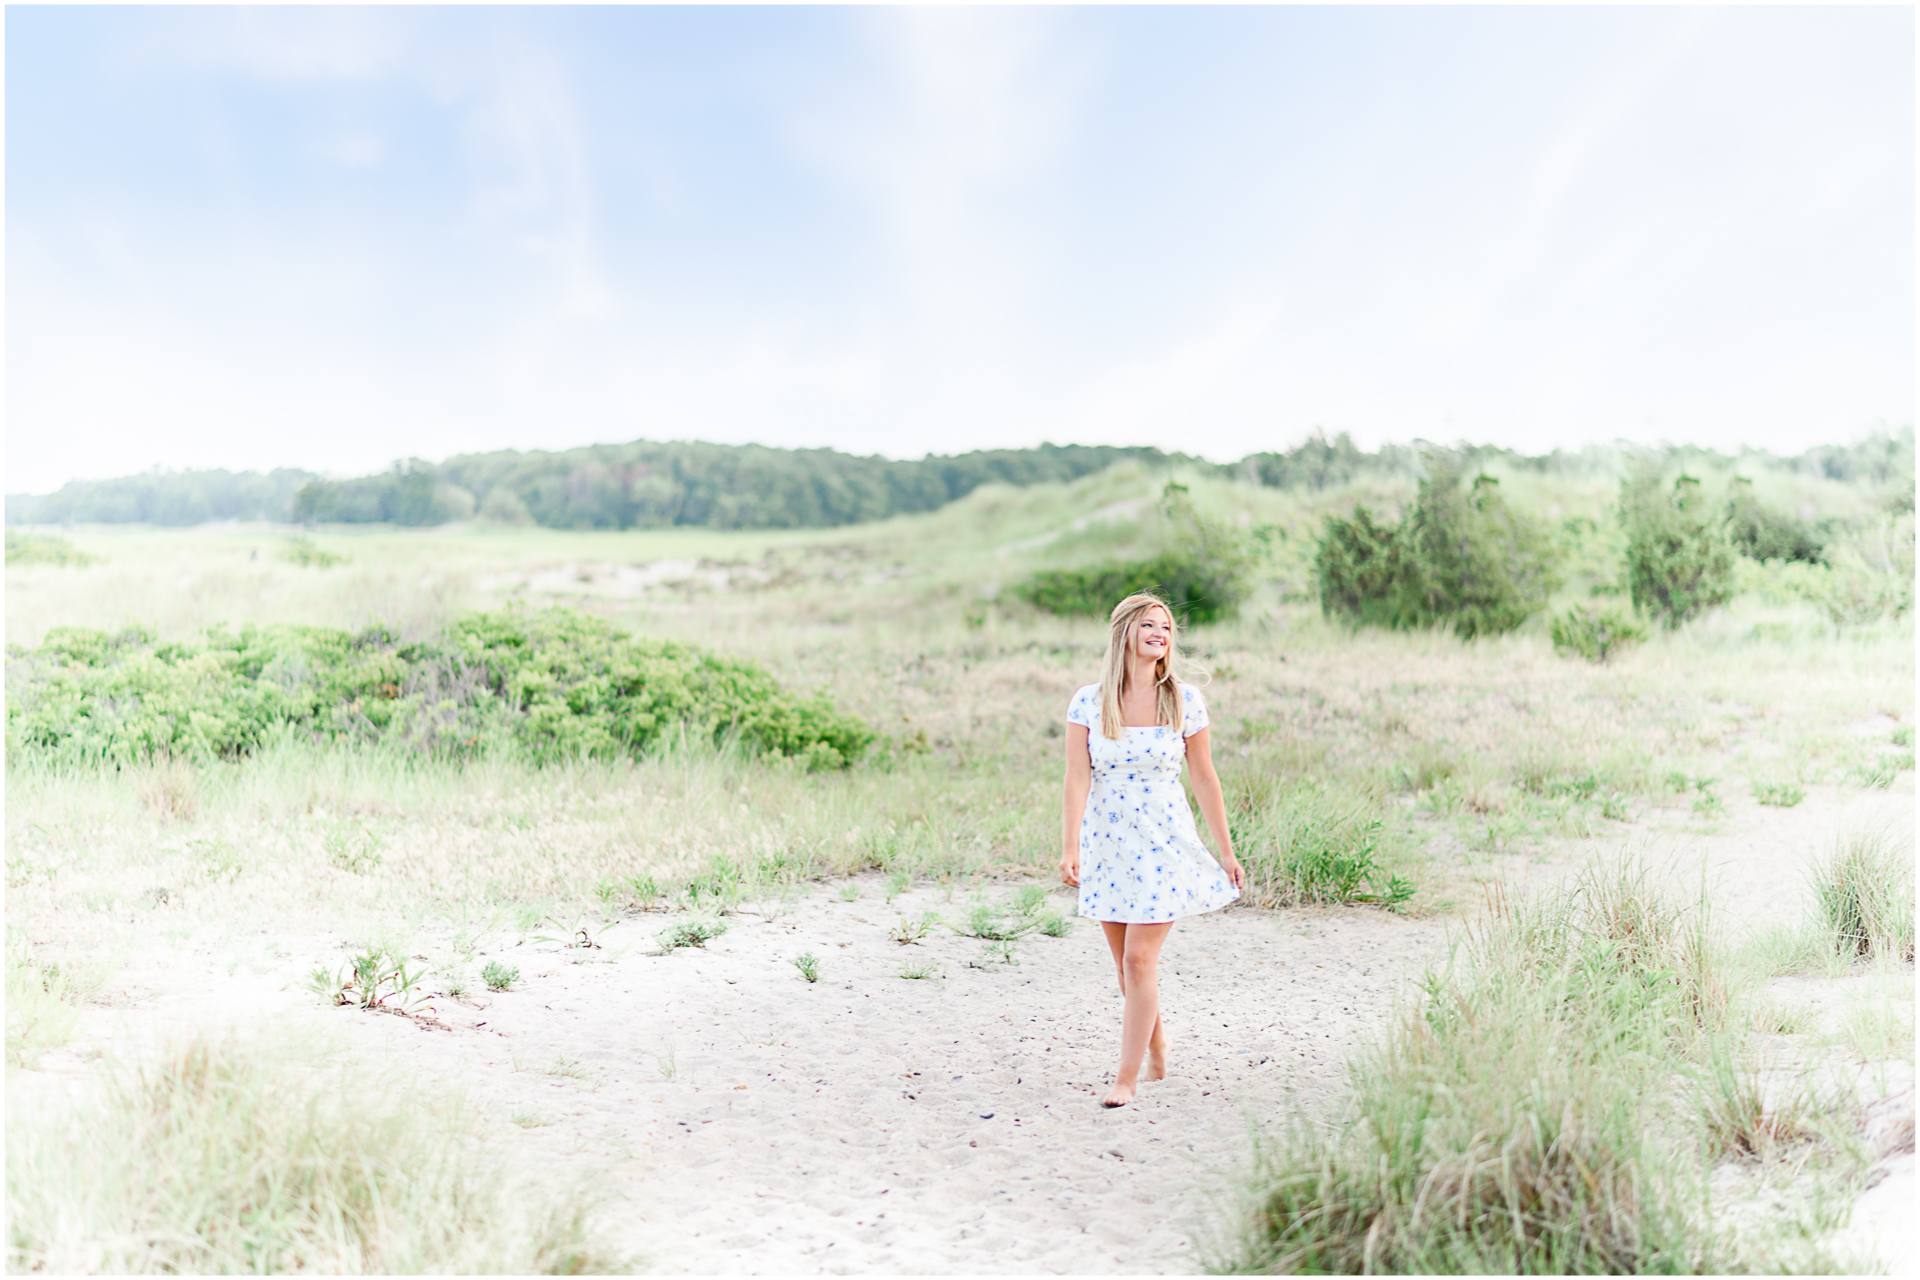 Photo by Marshfield senior portrait photographer Christina Runnals | High school girl wearing a white dress and walking along the sand at the beach